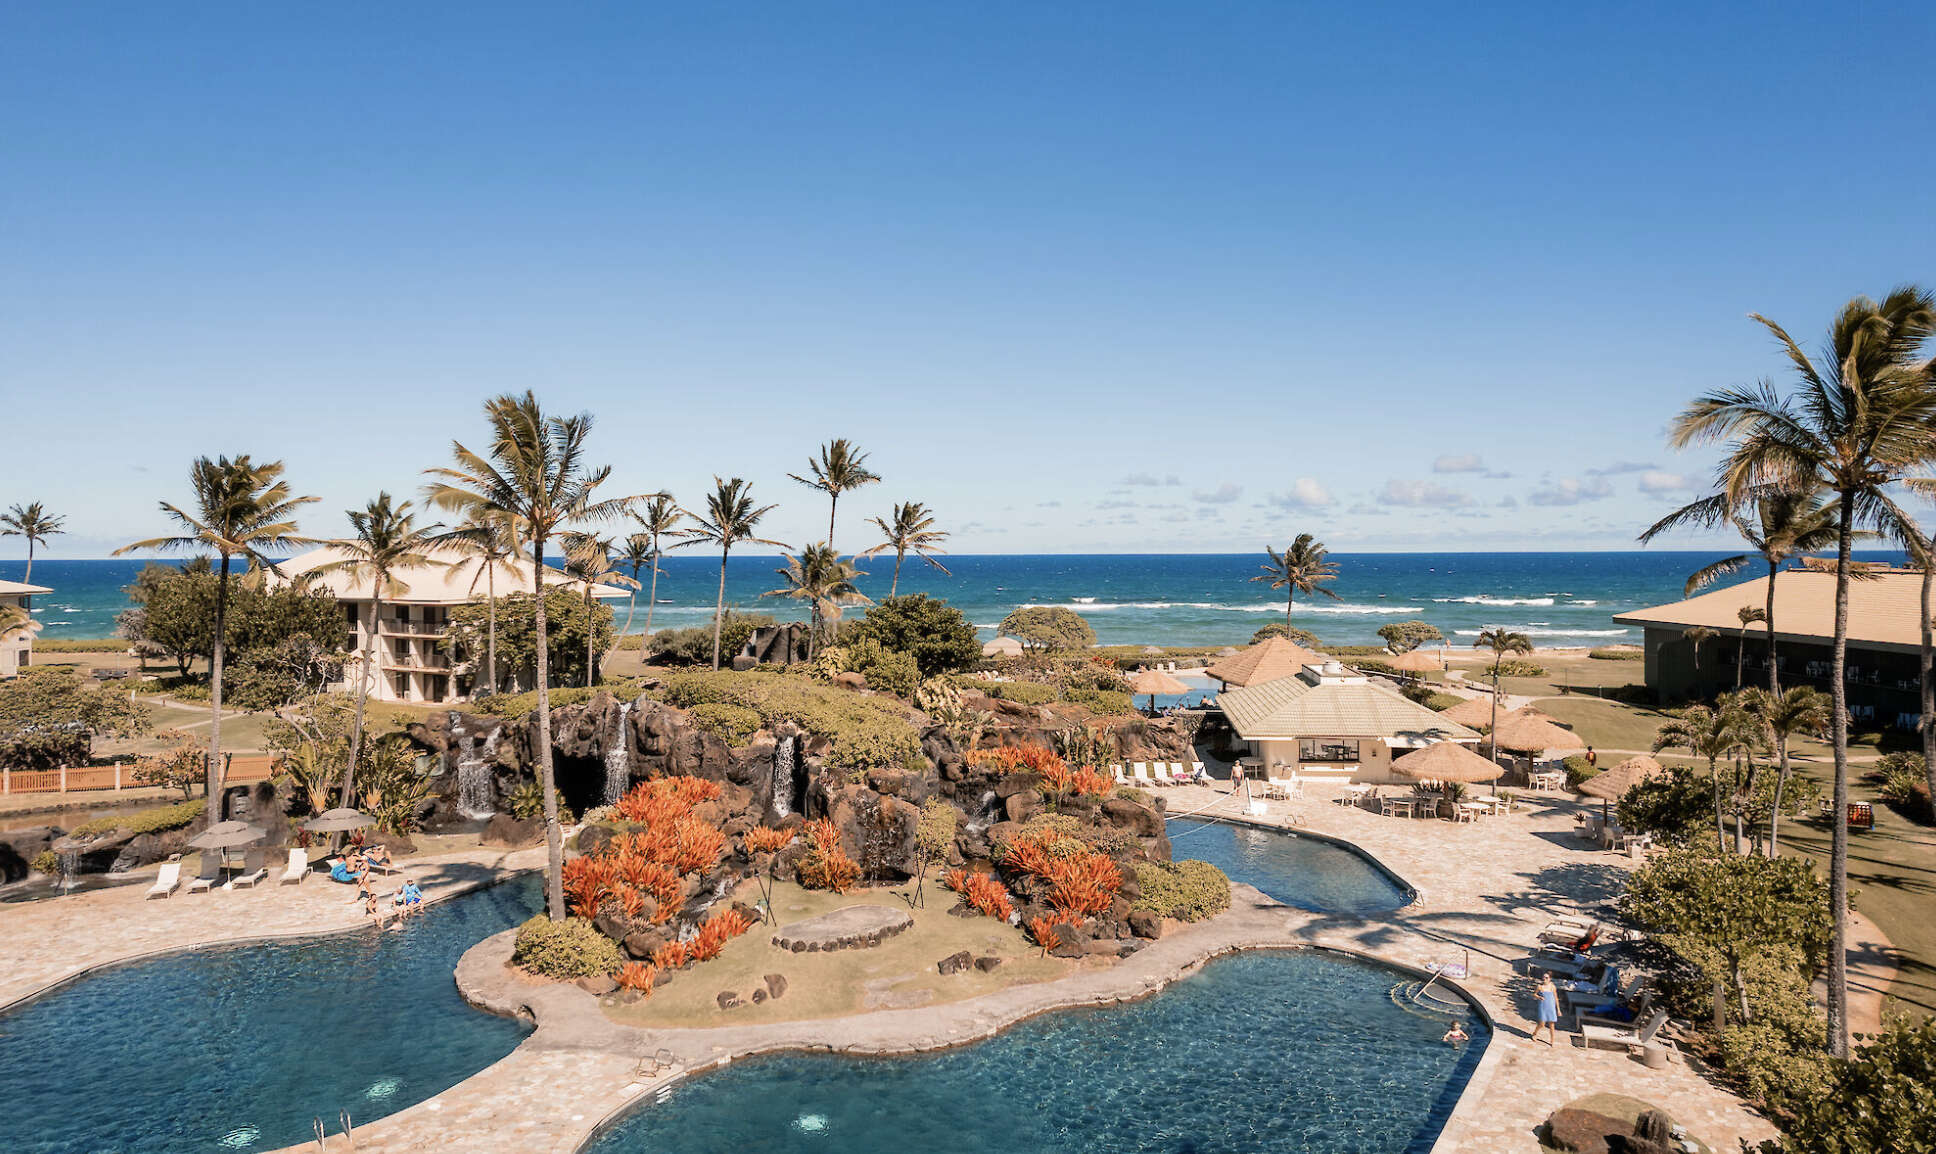 Paradise Found: Discover the Beauty and Luxury of Kauai Beach Resort for Your Next Hawaii Vacation